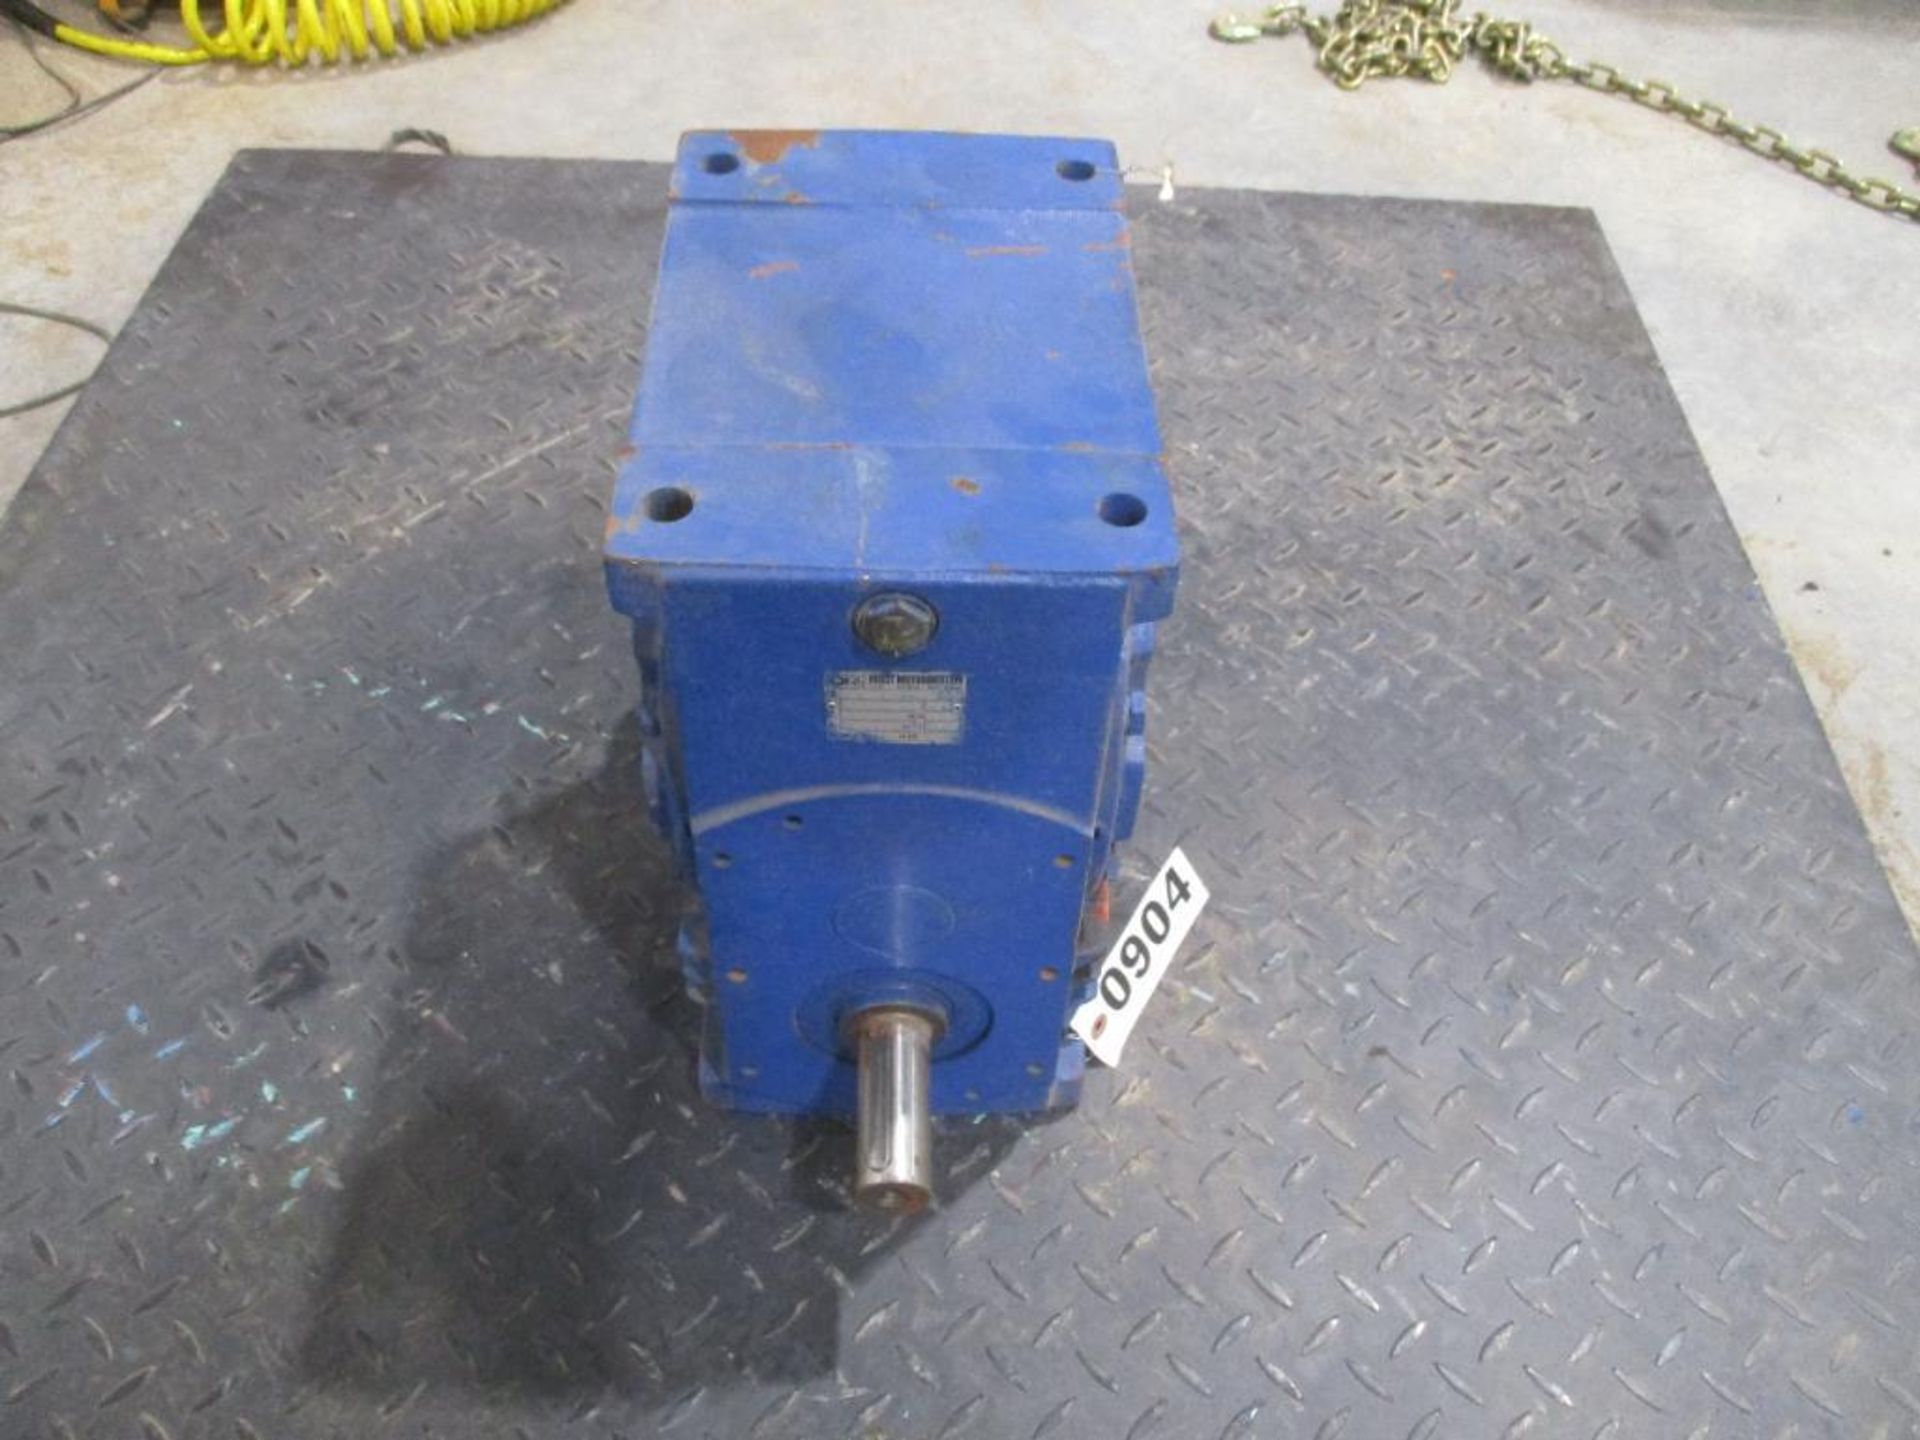 ROSSI MOTORIDUTTORI 16 RATIO REDUCER P/N RV125U02A, 163# lbs (There will be a $40 Rigging/Prep fee a - Image 4 of 5